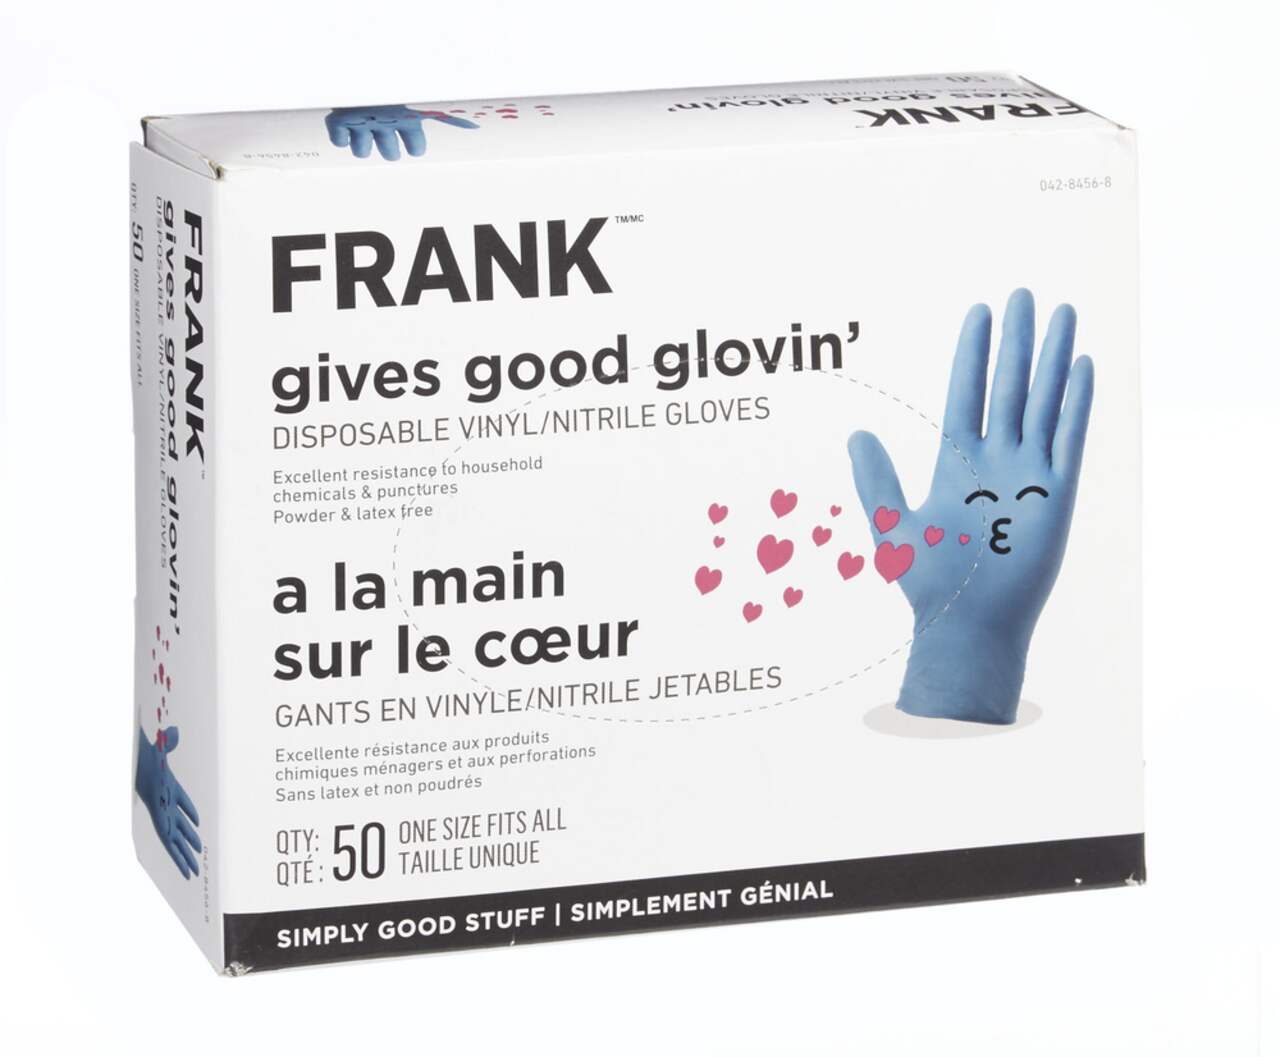 https://media-www.canadiantire.ca/product/living/cleaning/household-cleaning-tools/0428456/frank-disposable-nitryl-gloves-50-pack-d789cb34-6ac2-4734-b2aa-a4a81937e422.png?imdensity=1&imwidth=640&impolicy=mZoom